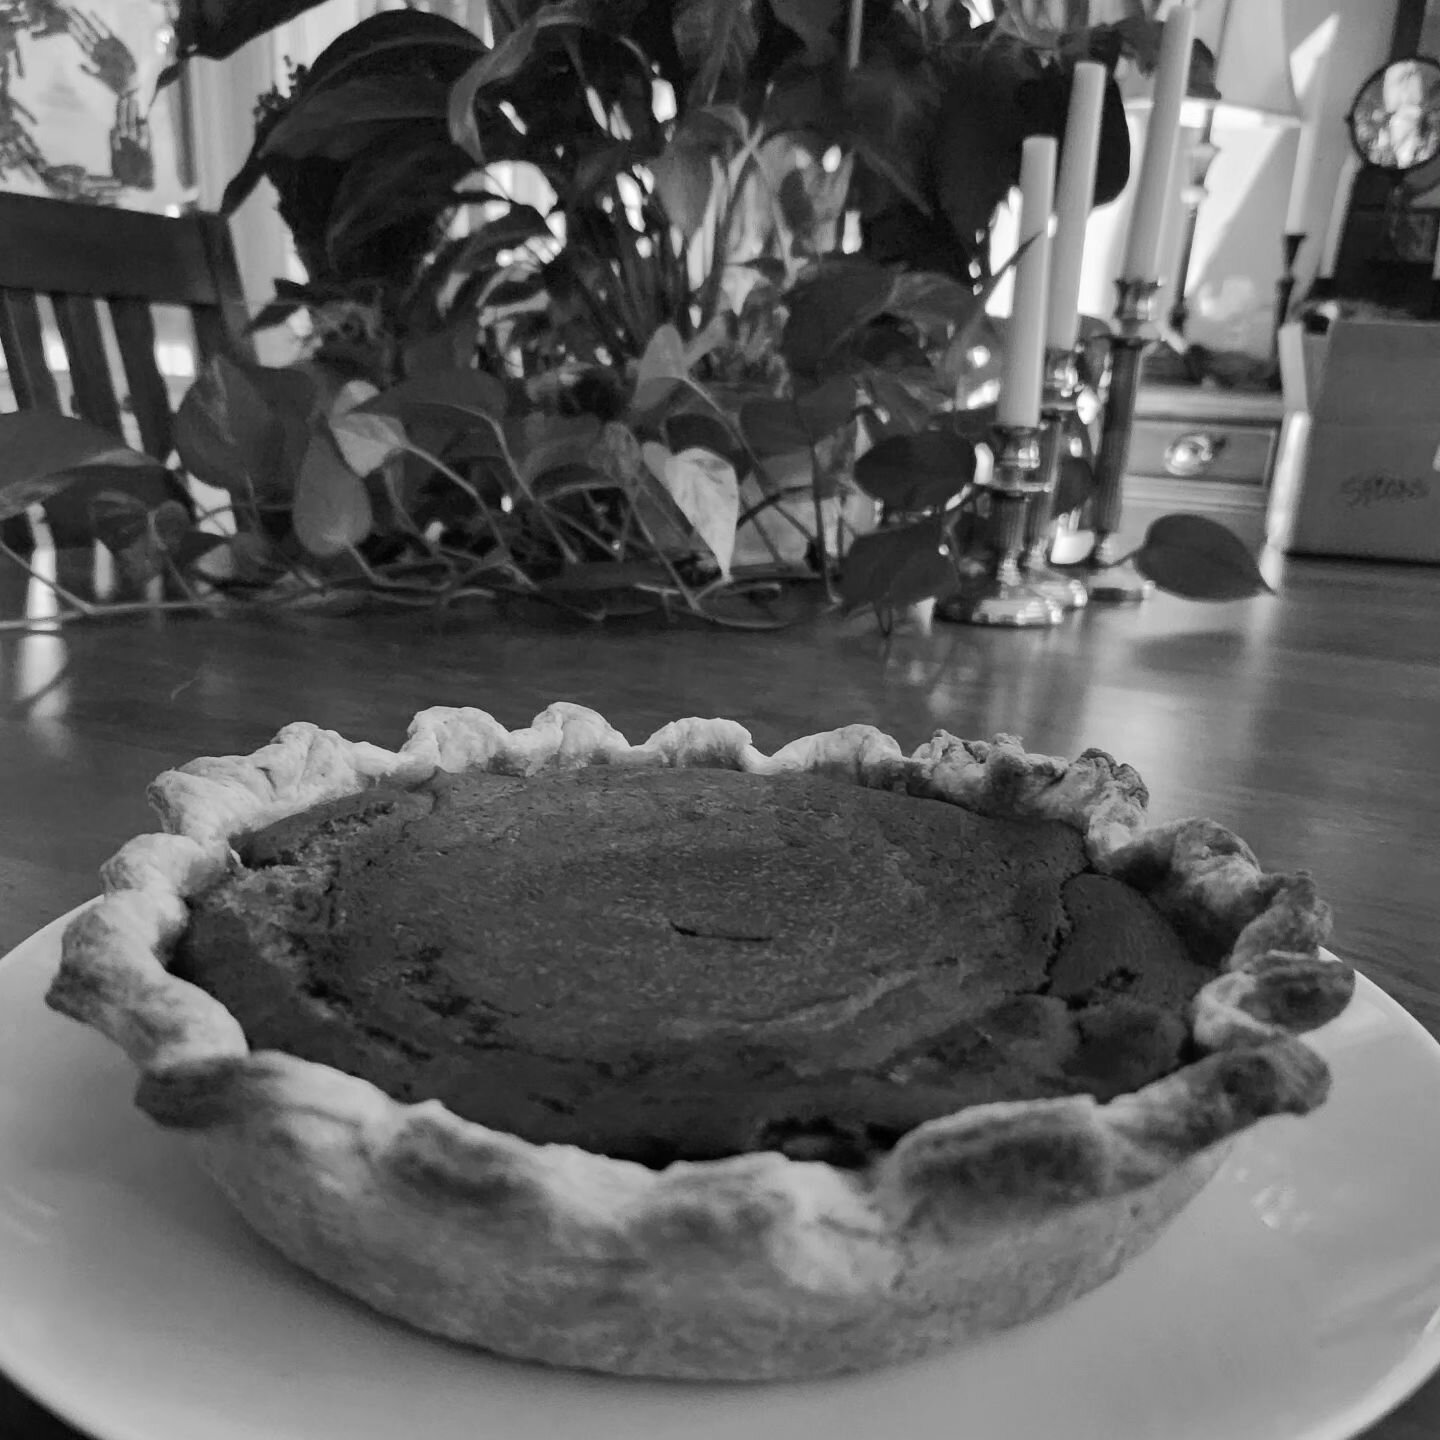 My friend Kate McDermott  #artofthepie says that one of the ways to judge a good  pie is whether or not you van lift the whole pie from the pie plate. Success!!! This is my pumpkin pie.  Piece by piece farm squash. Amazing!
#Thanksgiving #eatsustaina